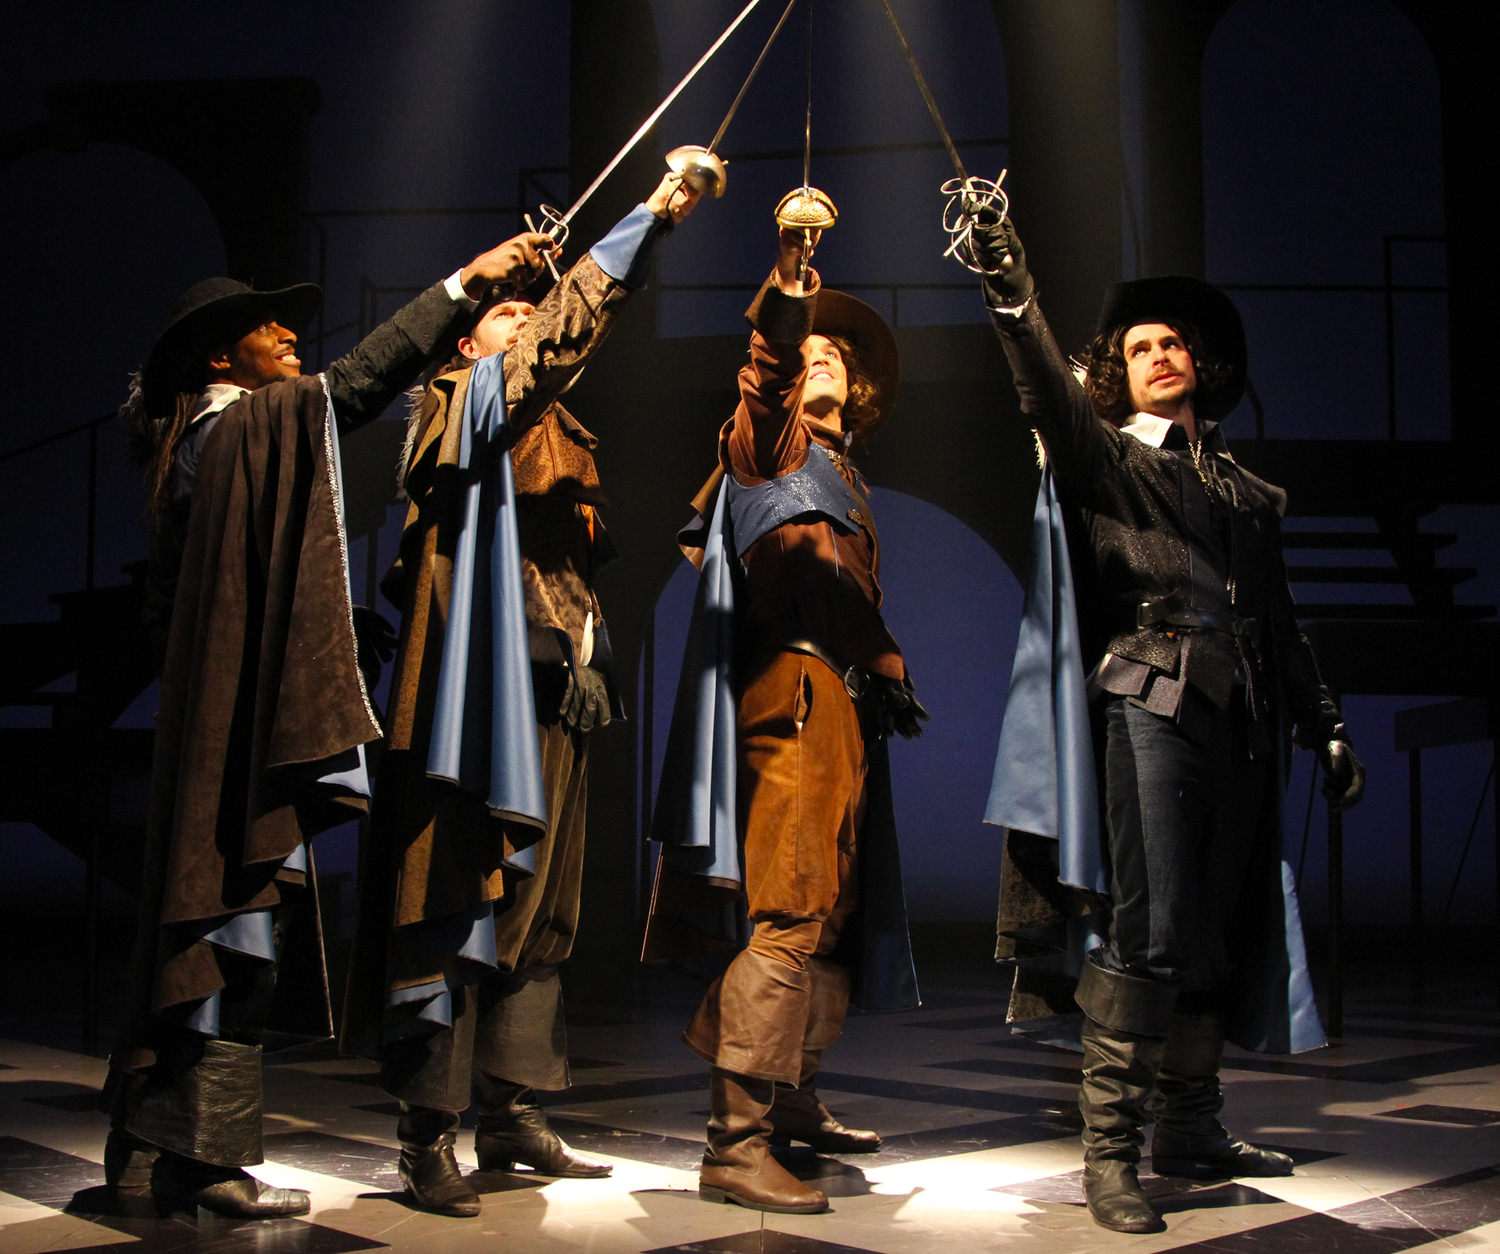 “All for One” L to R: Thomas Brazzle (Athos), Anthony J. Goes (Porthos), Will Haden (D’Artagnan) and James Jelkin (Aramis) star in The Three Musketeers at Connecticut Repertory Theatre from November 21 through December 8 in the Harriet S. Jorgensen Theatre, Storrs, CT. Photo by Gerry Goodstein.